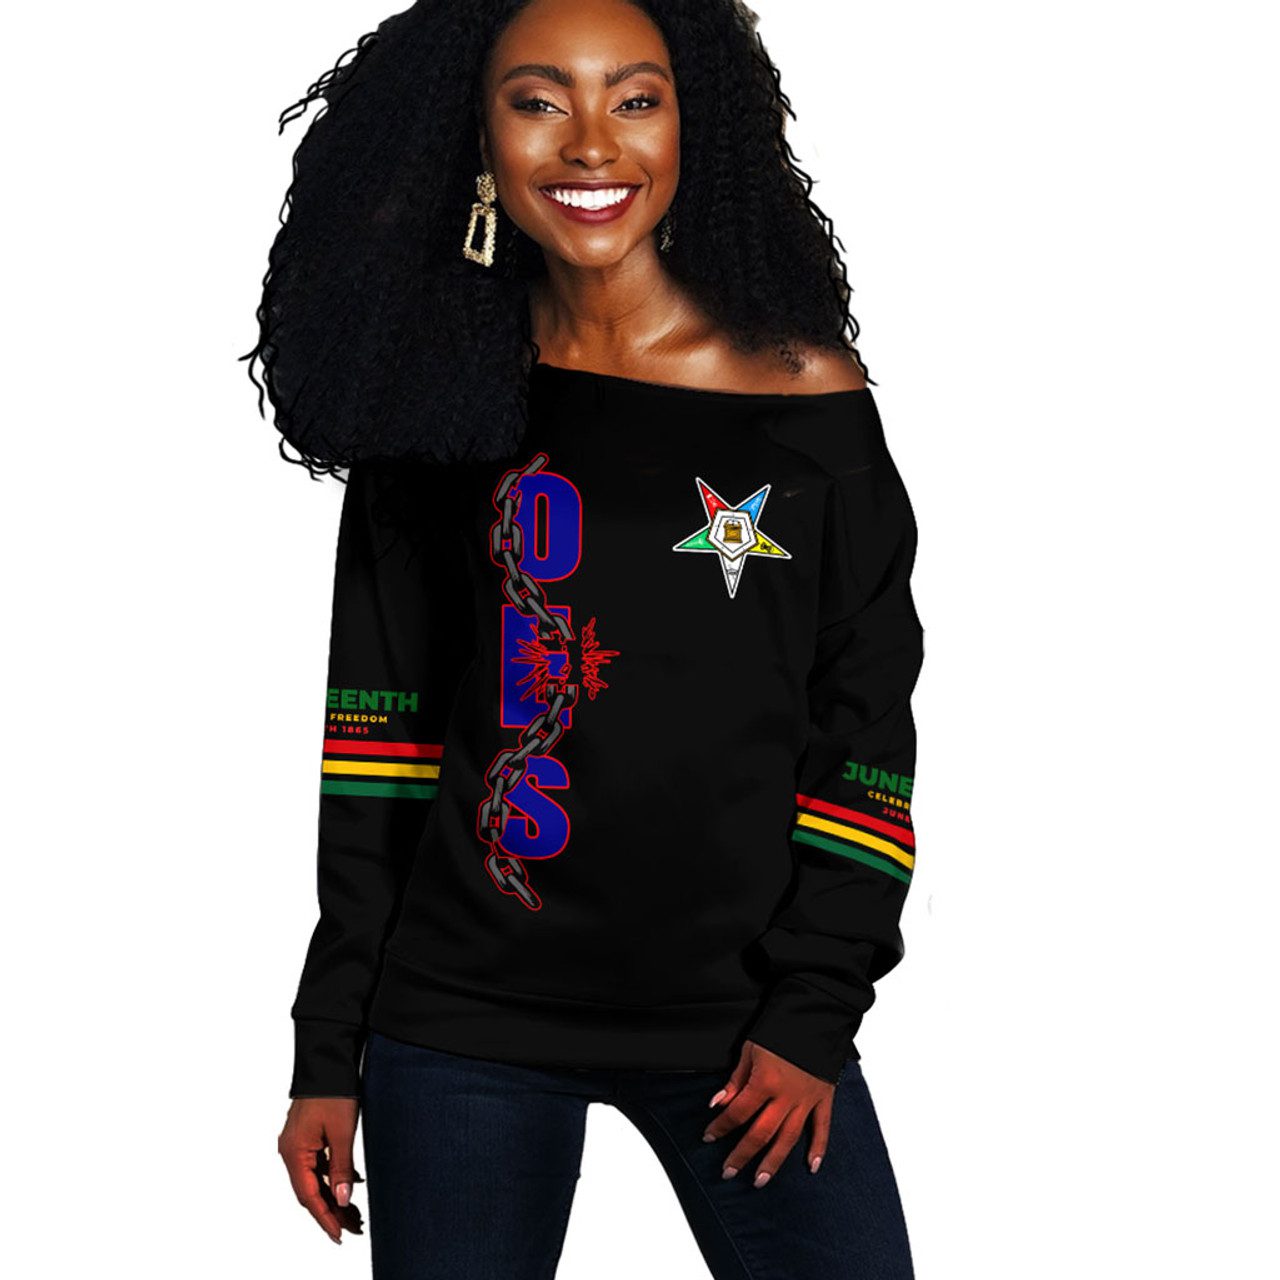 Order of the Eastern Star Off Shoulder Sweatshirt Juneteenth Chain Freedom Day